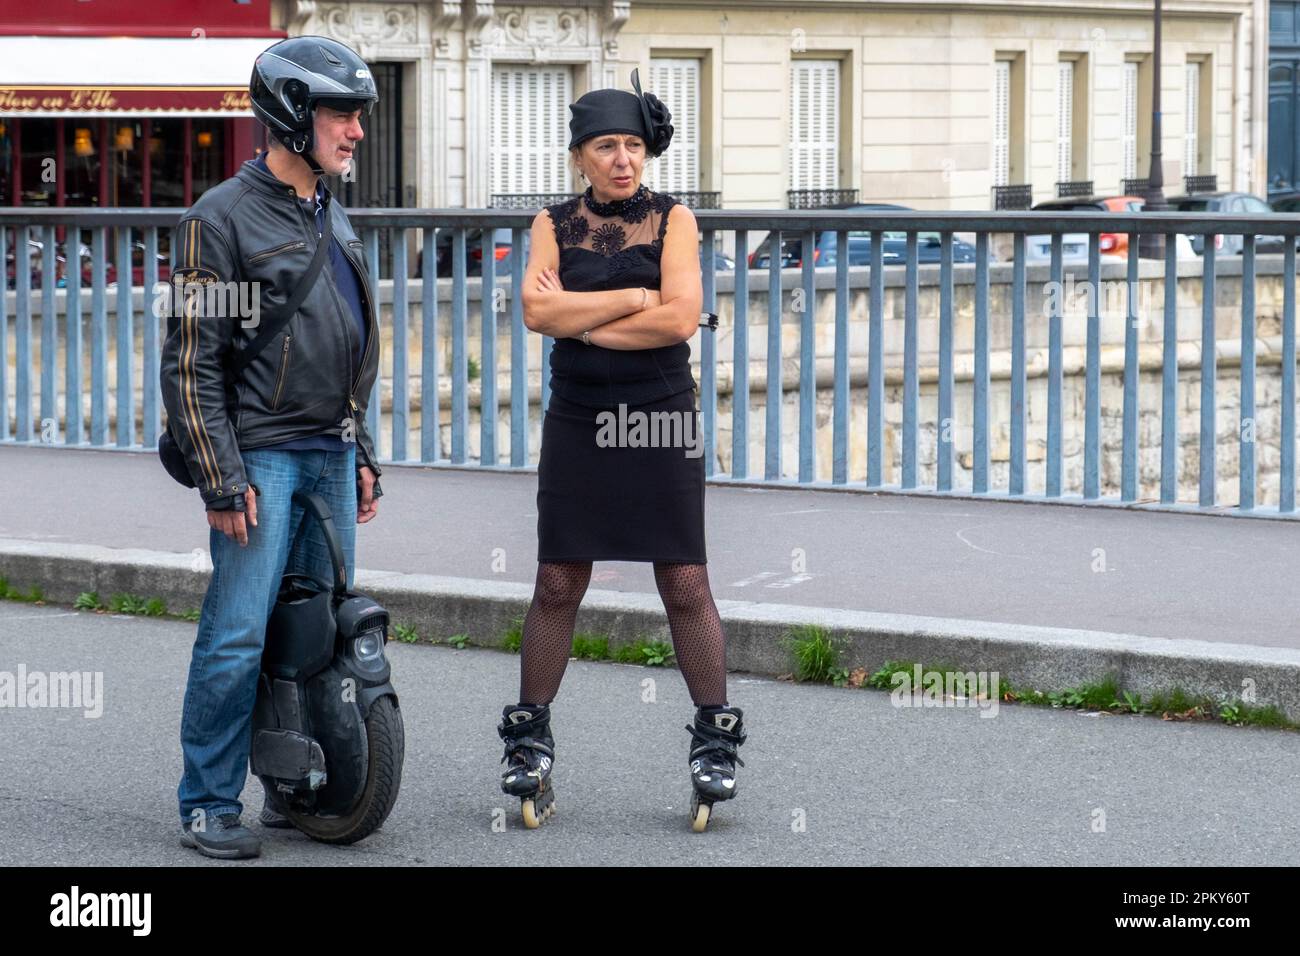 Timeless Encounters: 60-Year-Old Woman on Roller Blades in Vintage 1940s Attire Conversing with White-Bearded Man on Electric Unicycle Stock Photo